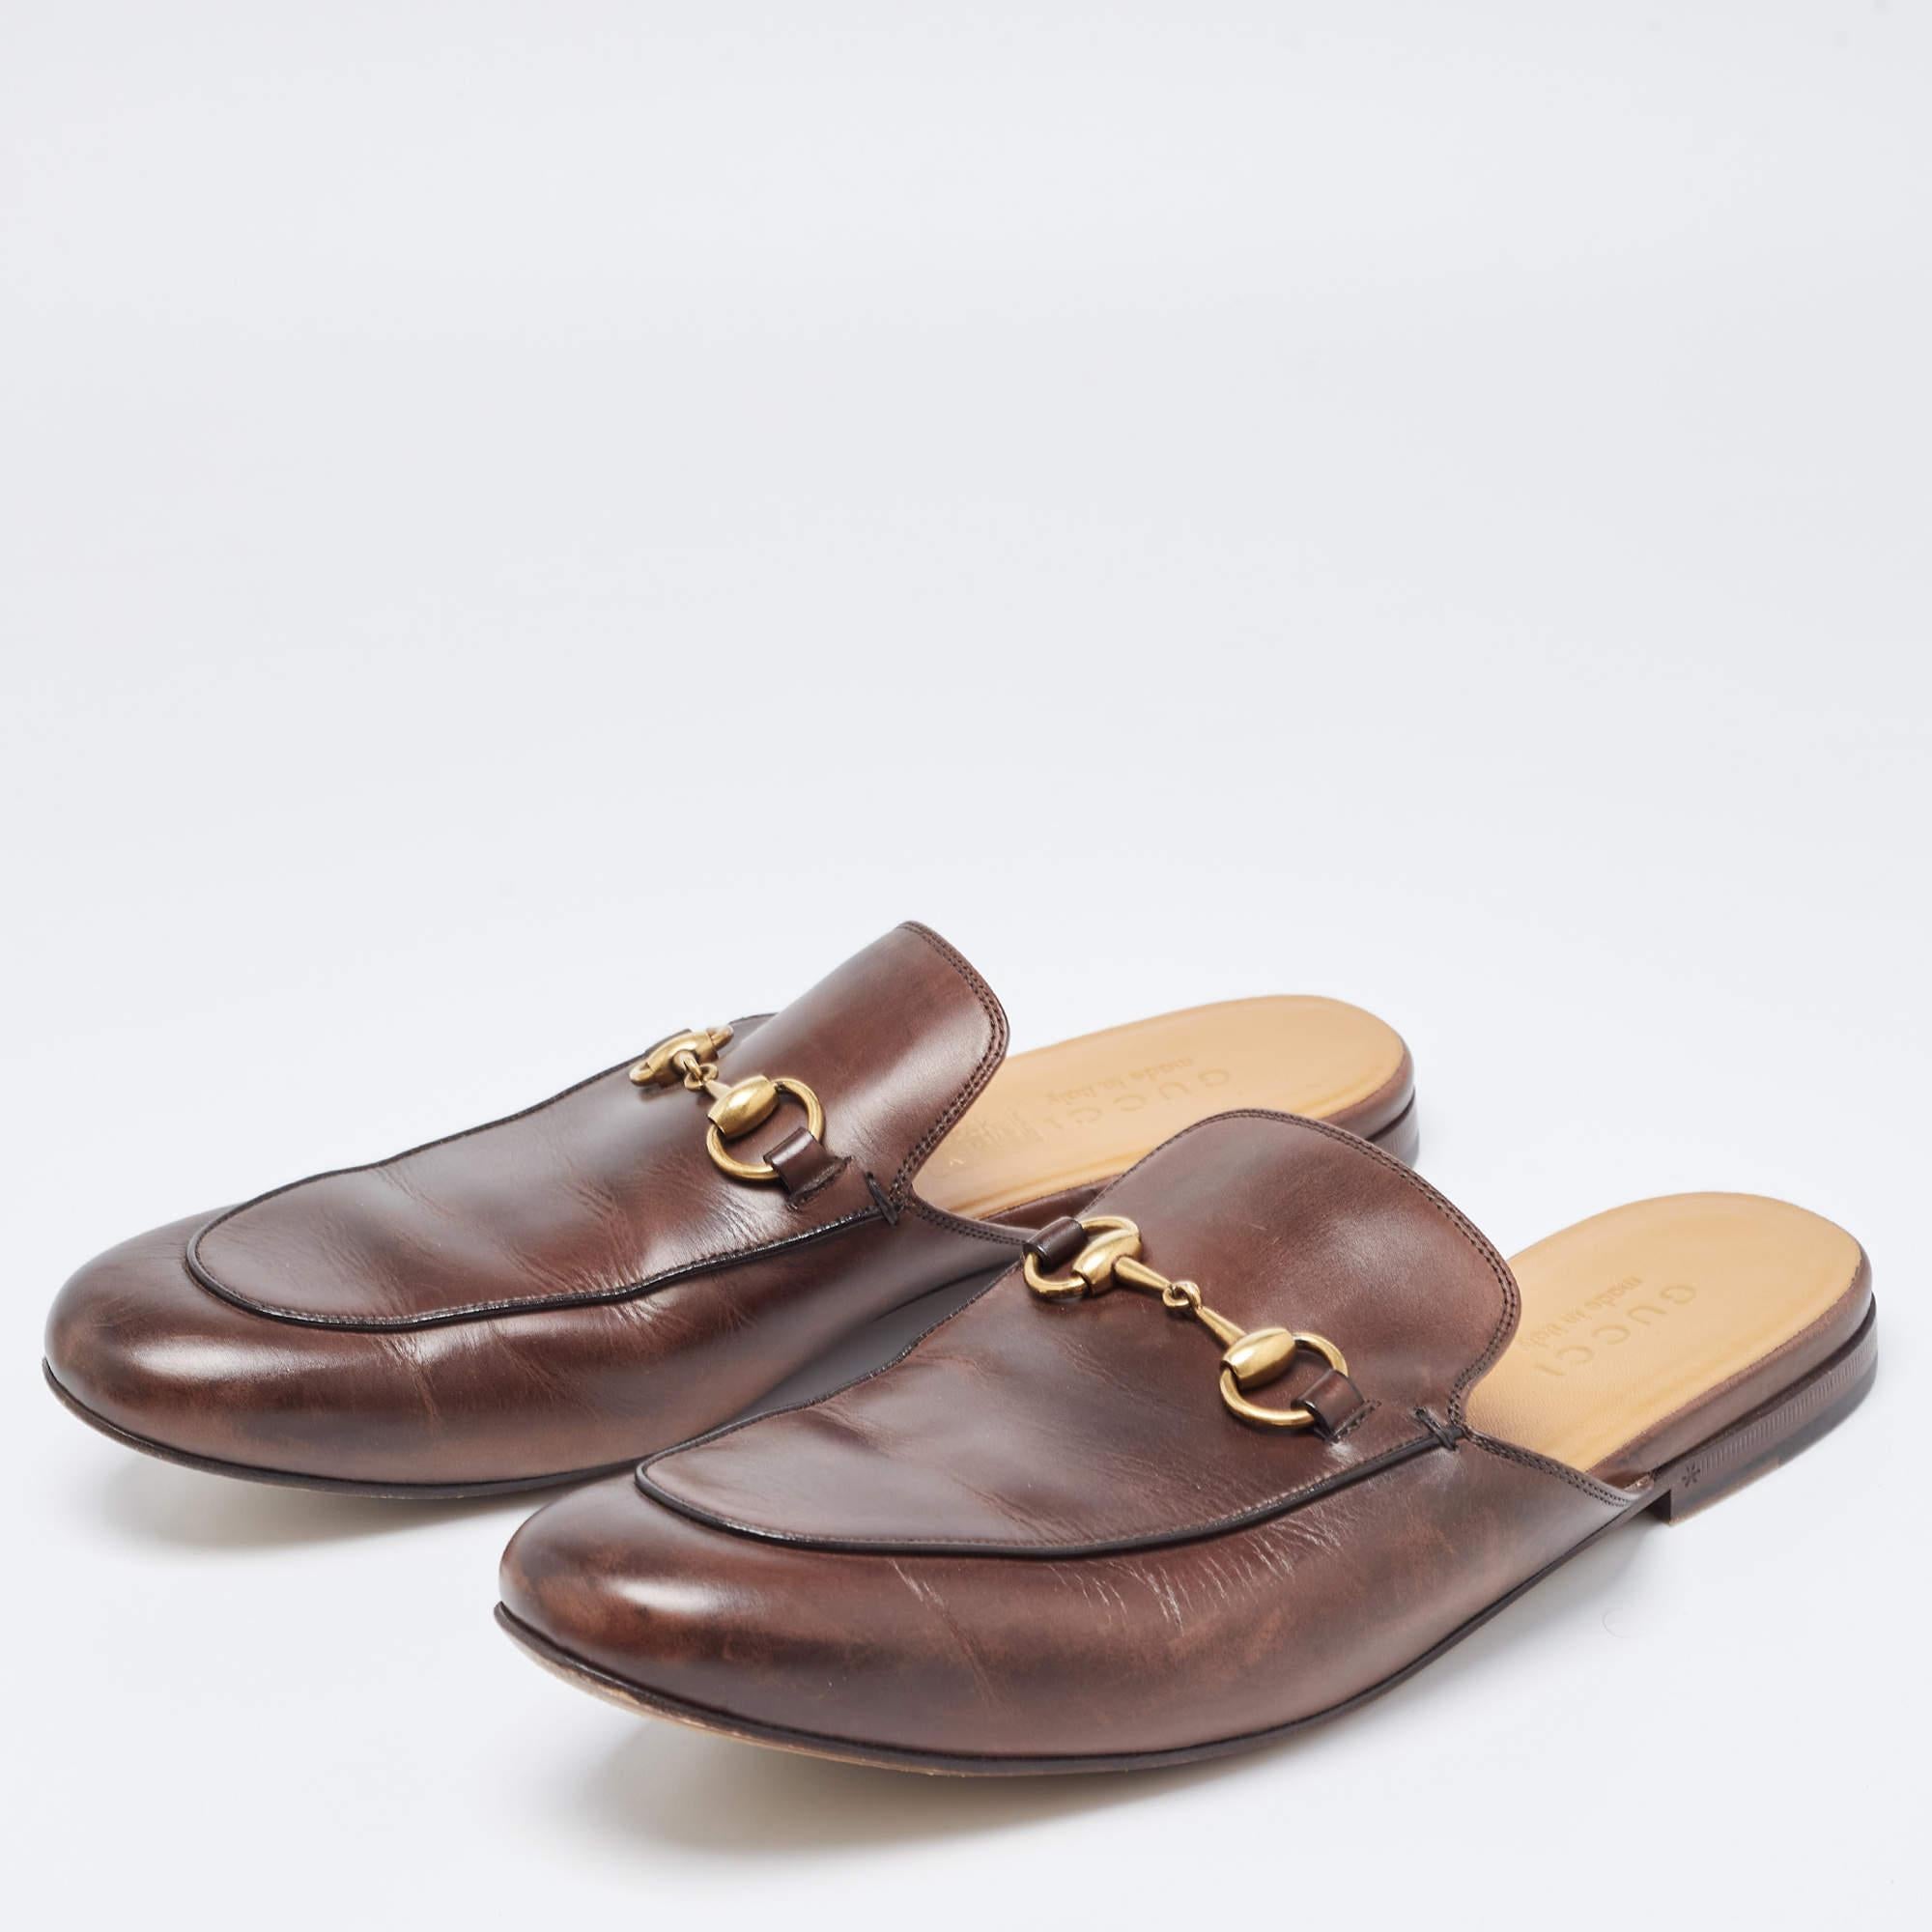 A perfect blend of luxury, style, and comfort, these designer mules are made using quality materials and frame your feet in the most elegant way. They can be paired with a host of outfits from your wardrobe.

